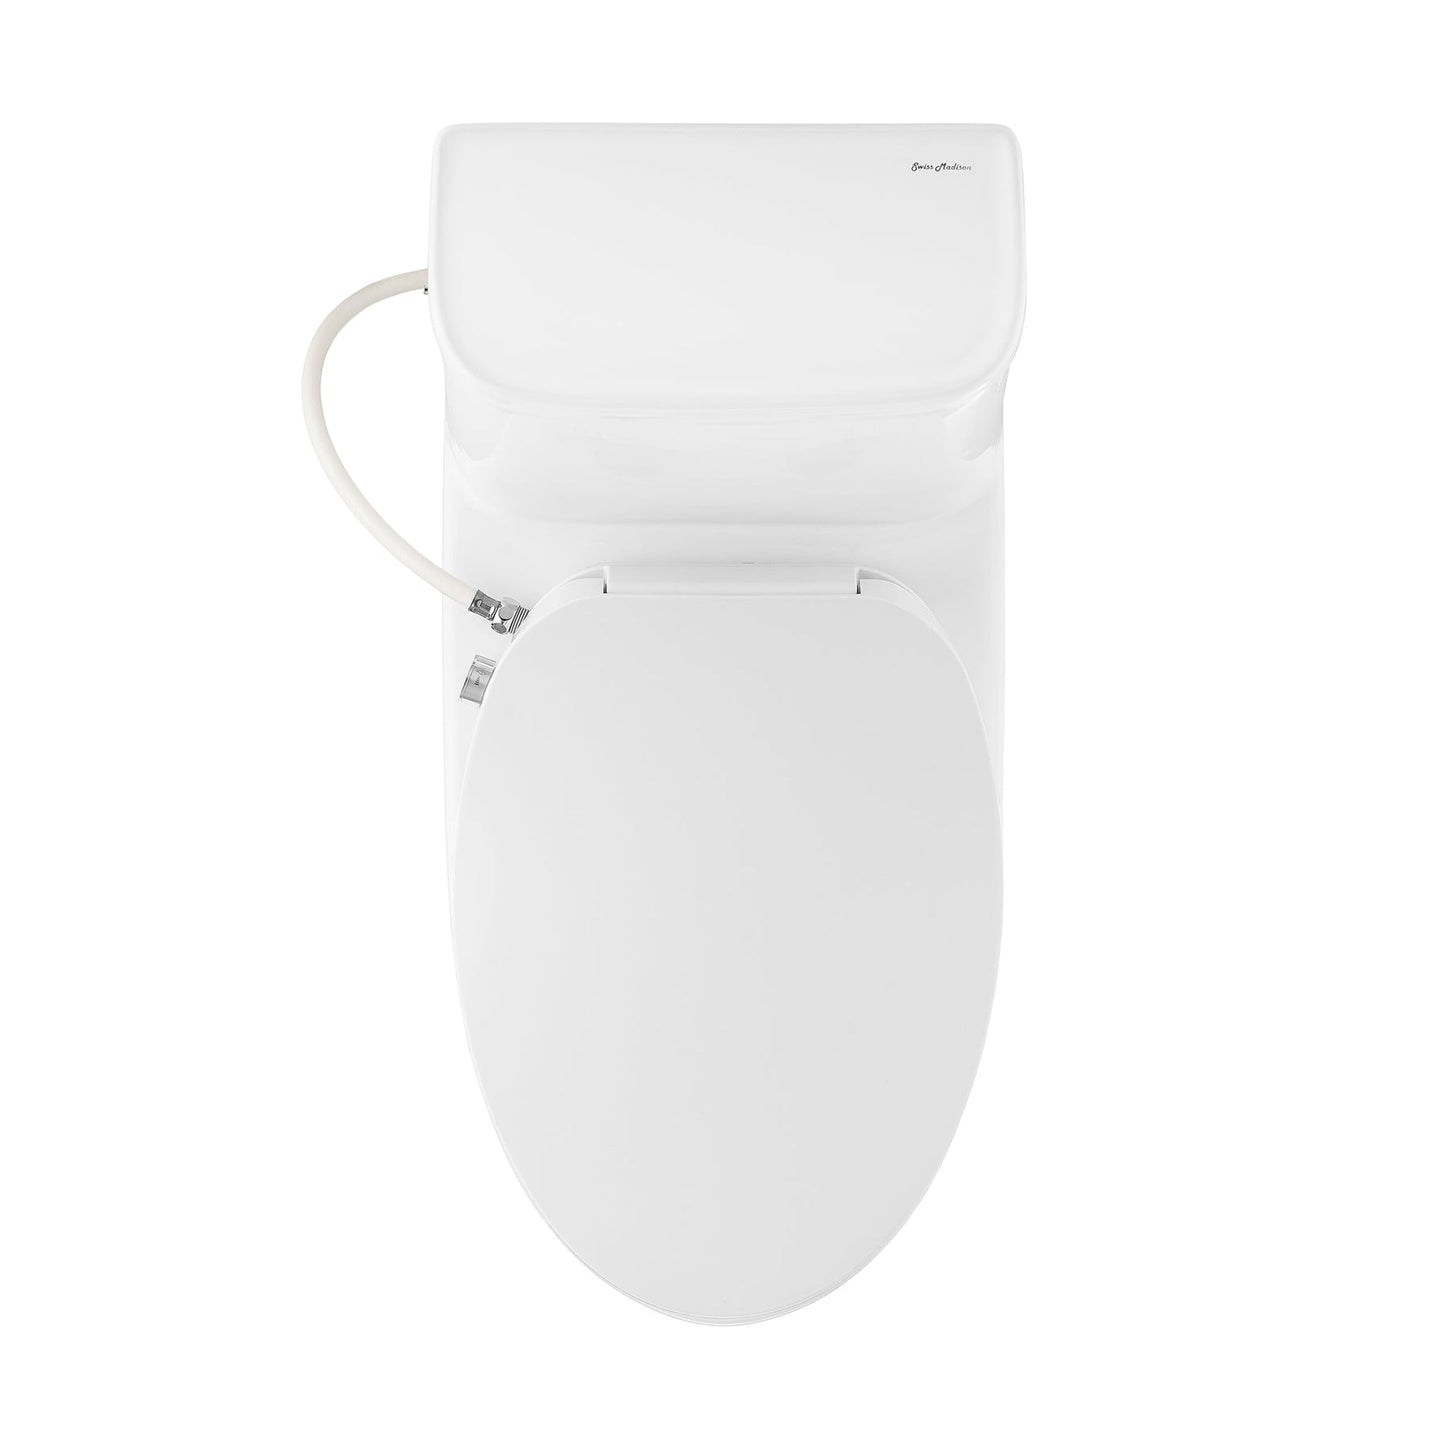 Swiss Madison Avancer 15" x 29" One-Piece White Elongated Floor-Mounted Toilet With 0.95/1.6 GPF Touchless Dual Flush and Cascade Smart Seat Bidet